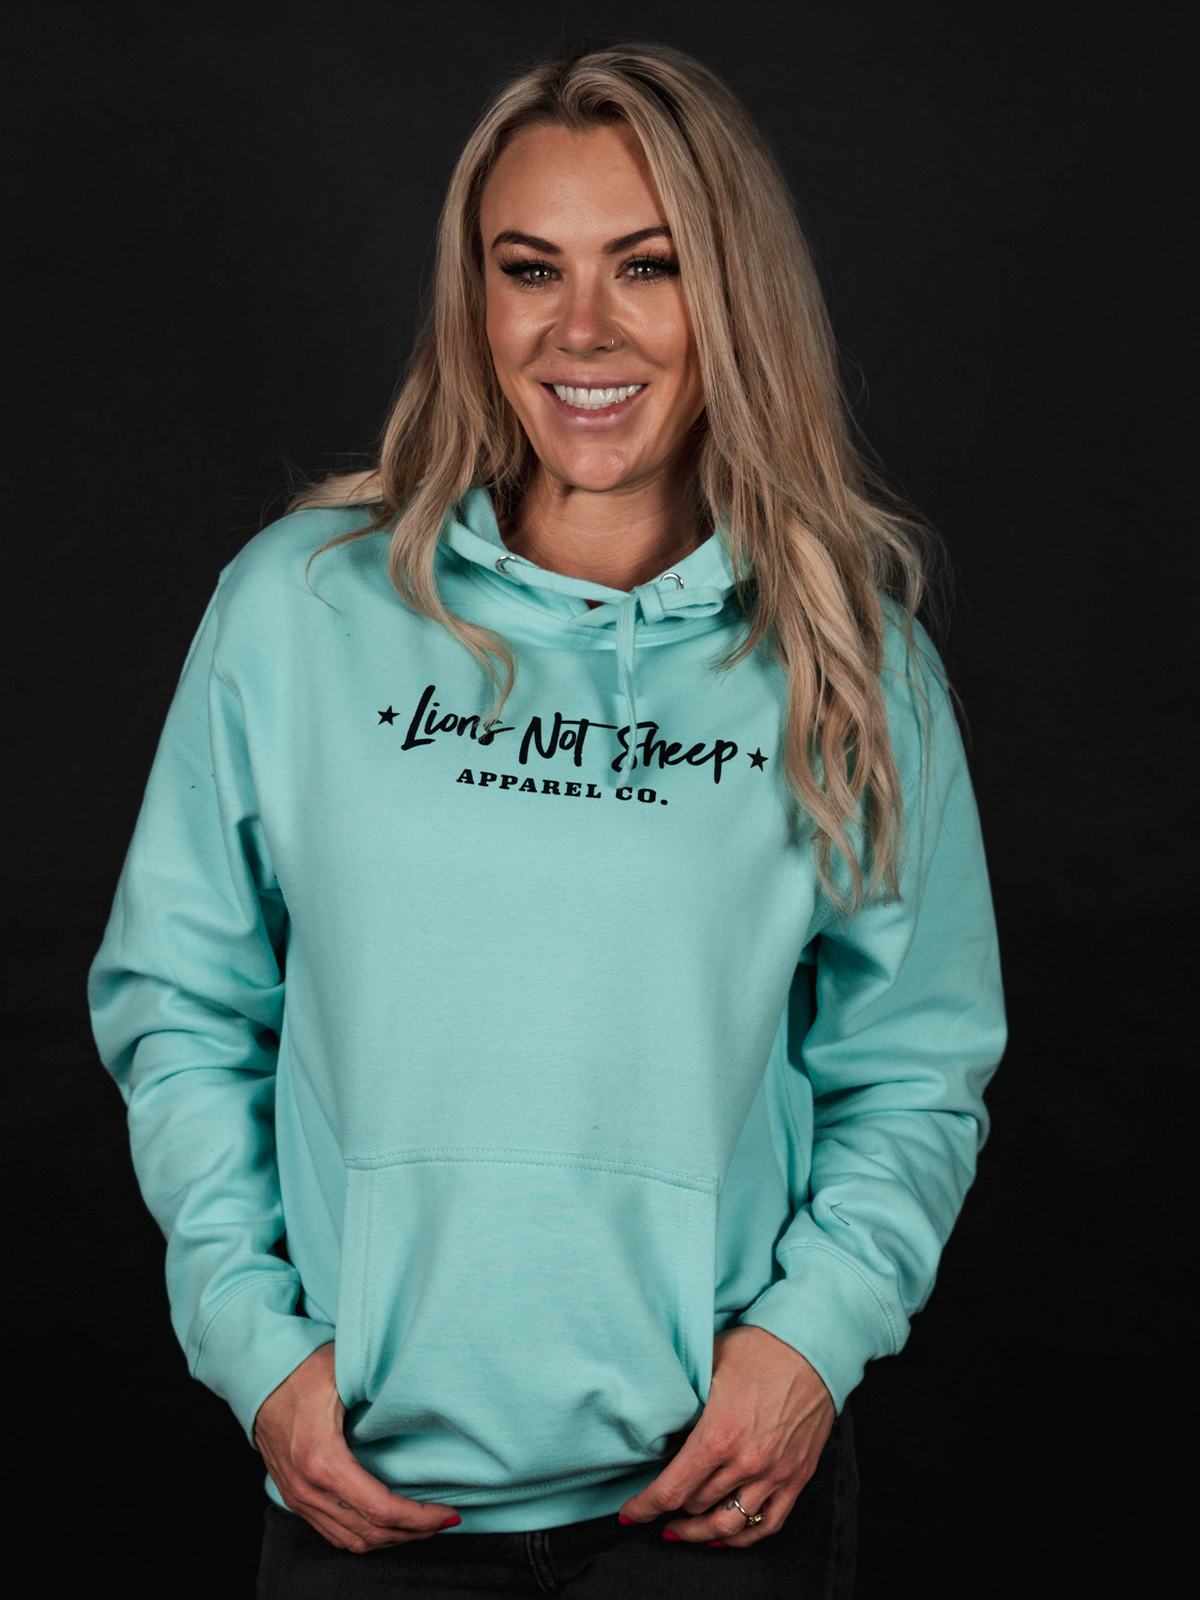 LIONS NOT SHEEP APPAREL CO. Unisex Pullover Hoodie (Mint) - Lions Not Sheep ®